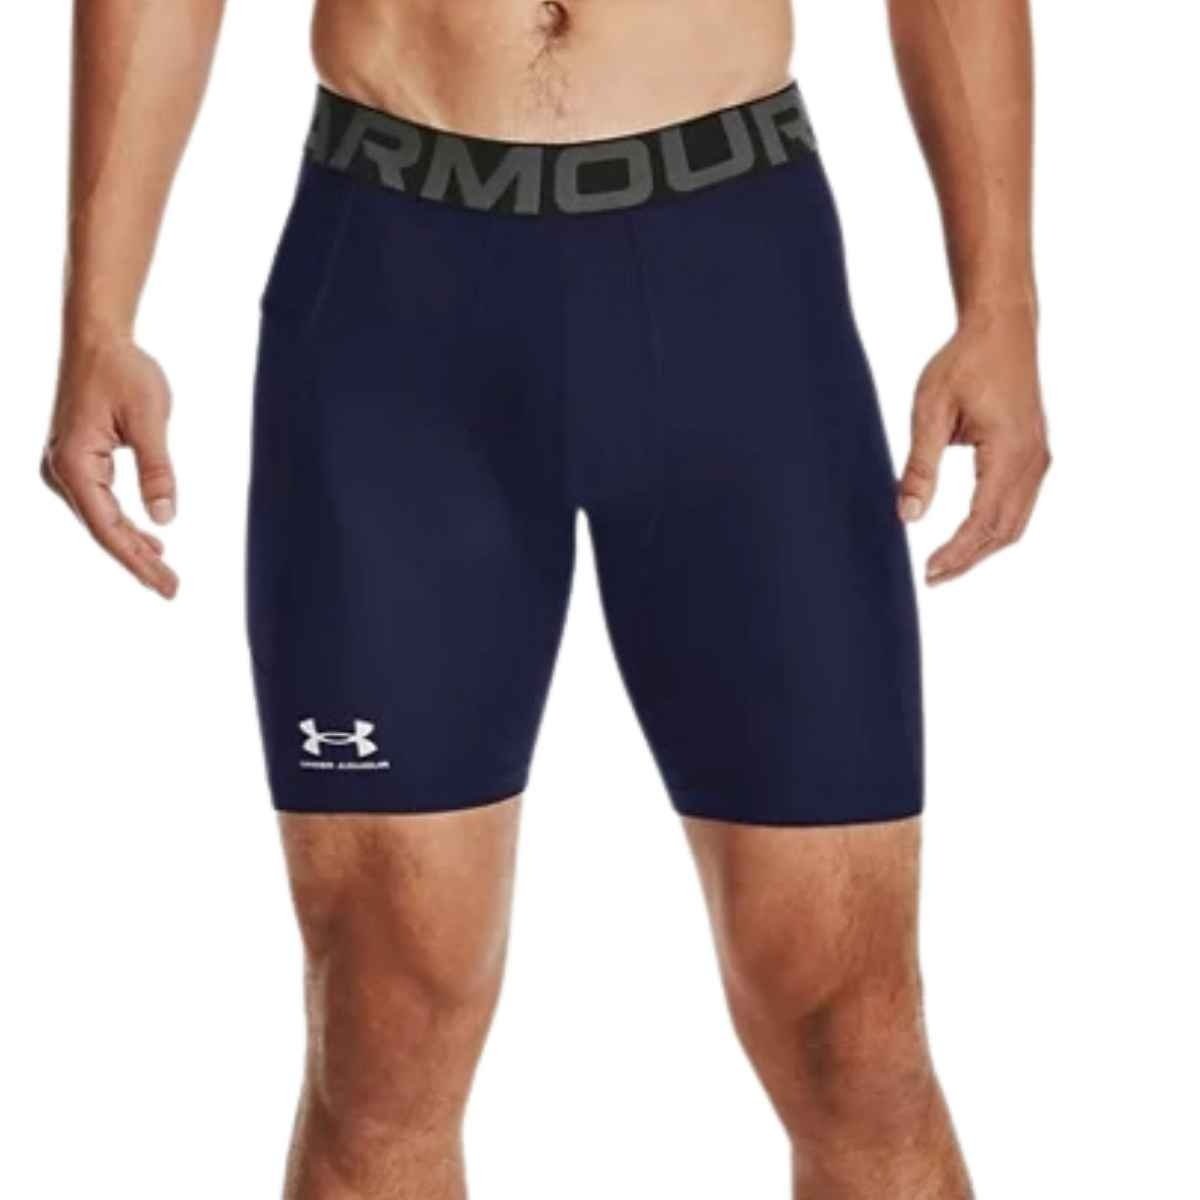 High Quality 2 In 1 Running Pants Half For Men Quick Dry Sports Shirts For  Soccer, Gym, And Fitness Drak22 From Drakessia, $25.81 | DHgate.Com